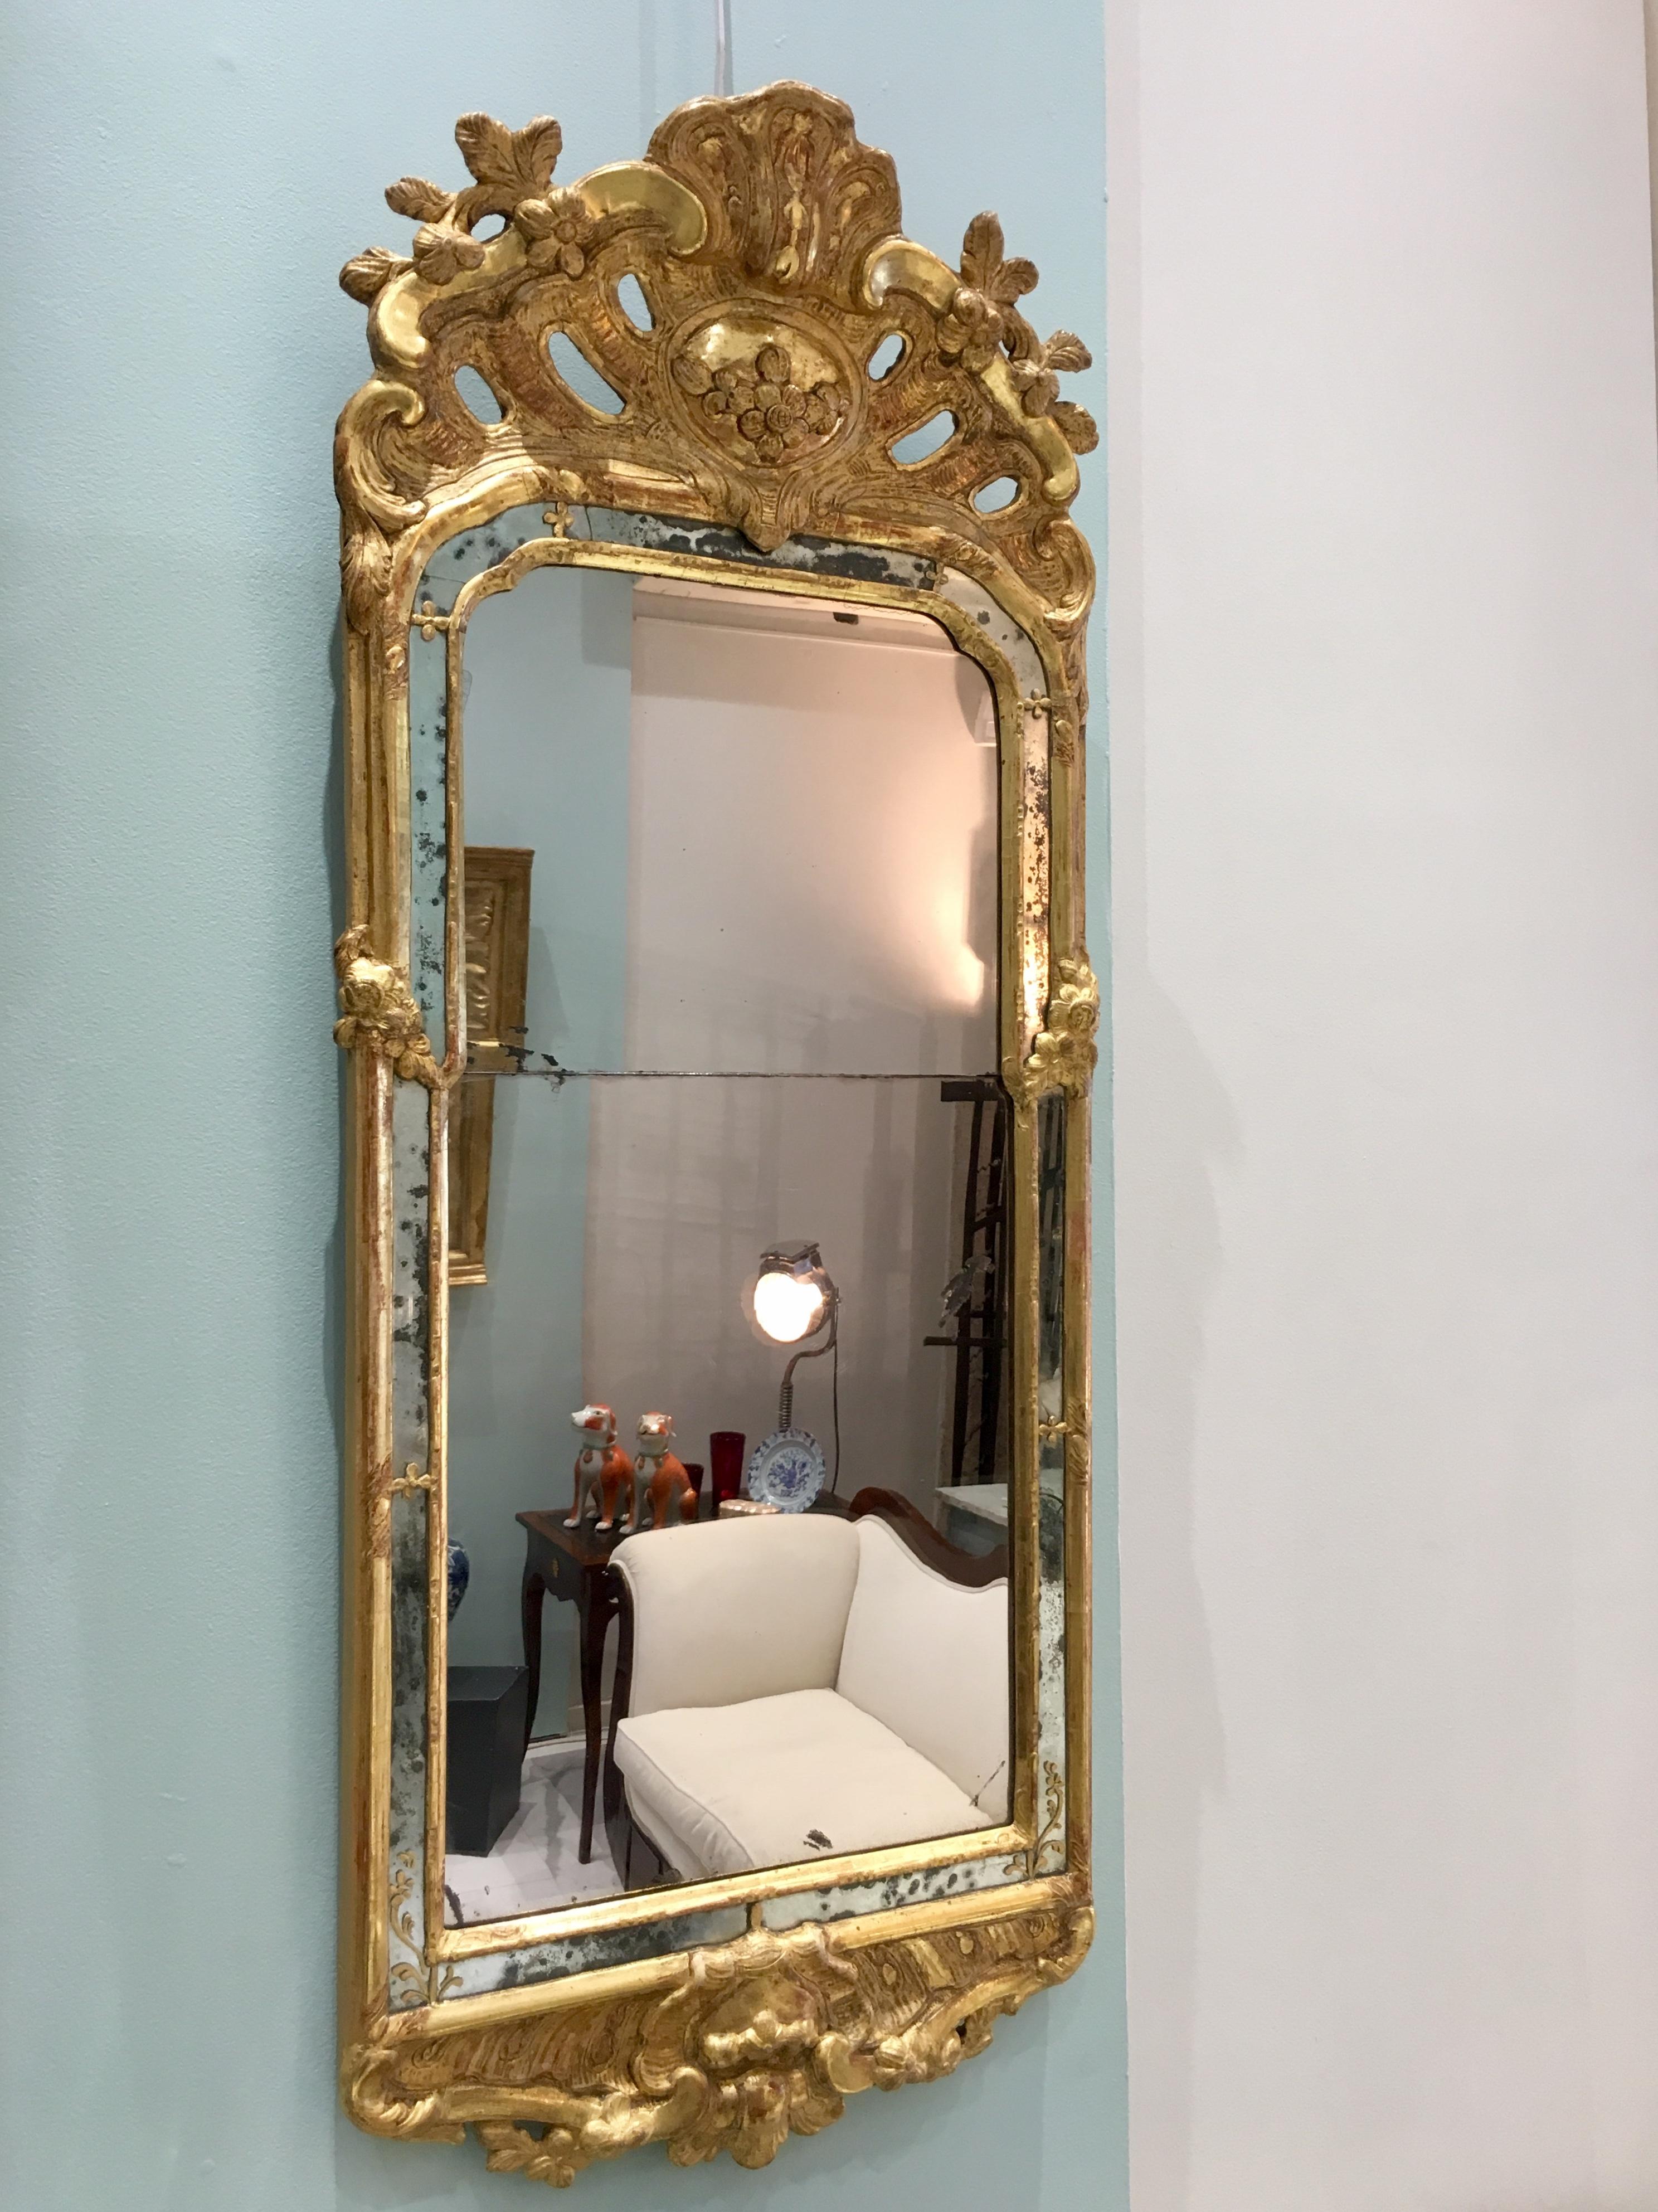 18th Century Rococo Swedish Mirror on Carved and Giltwood. Decorated with foliage motifs and crested by a shell and acanthus leaves. Around the main mirror plate, there is a mirror frame toped by delicate gilt carvings and painted floral